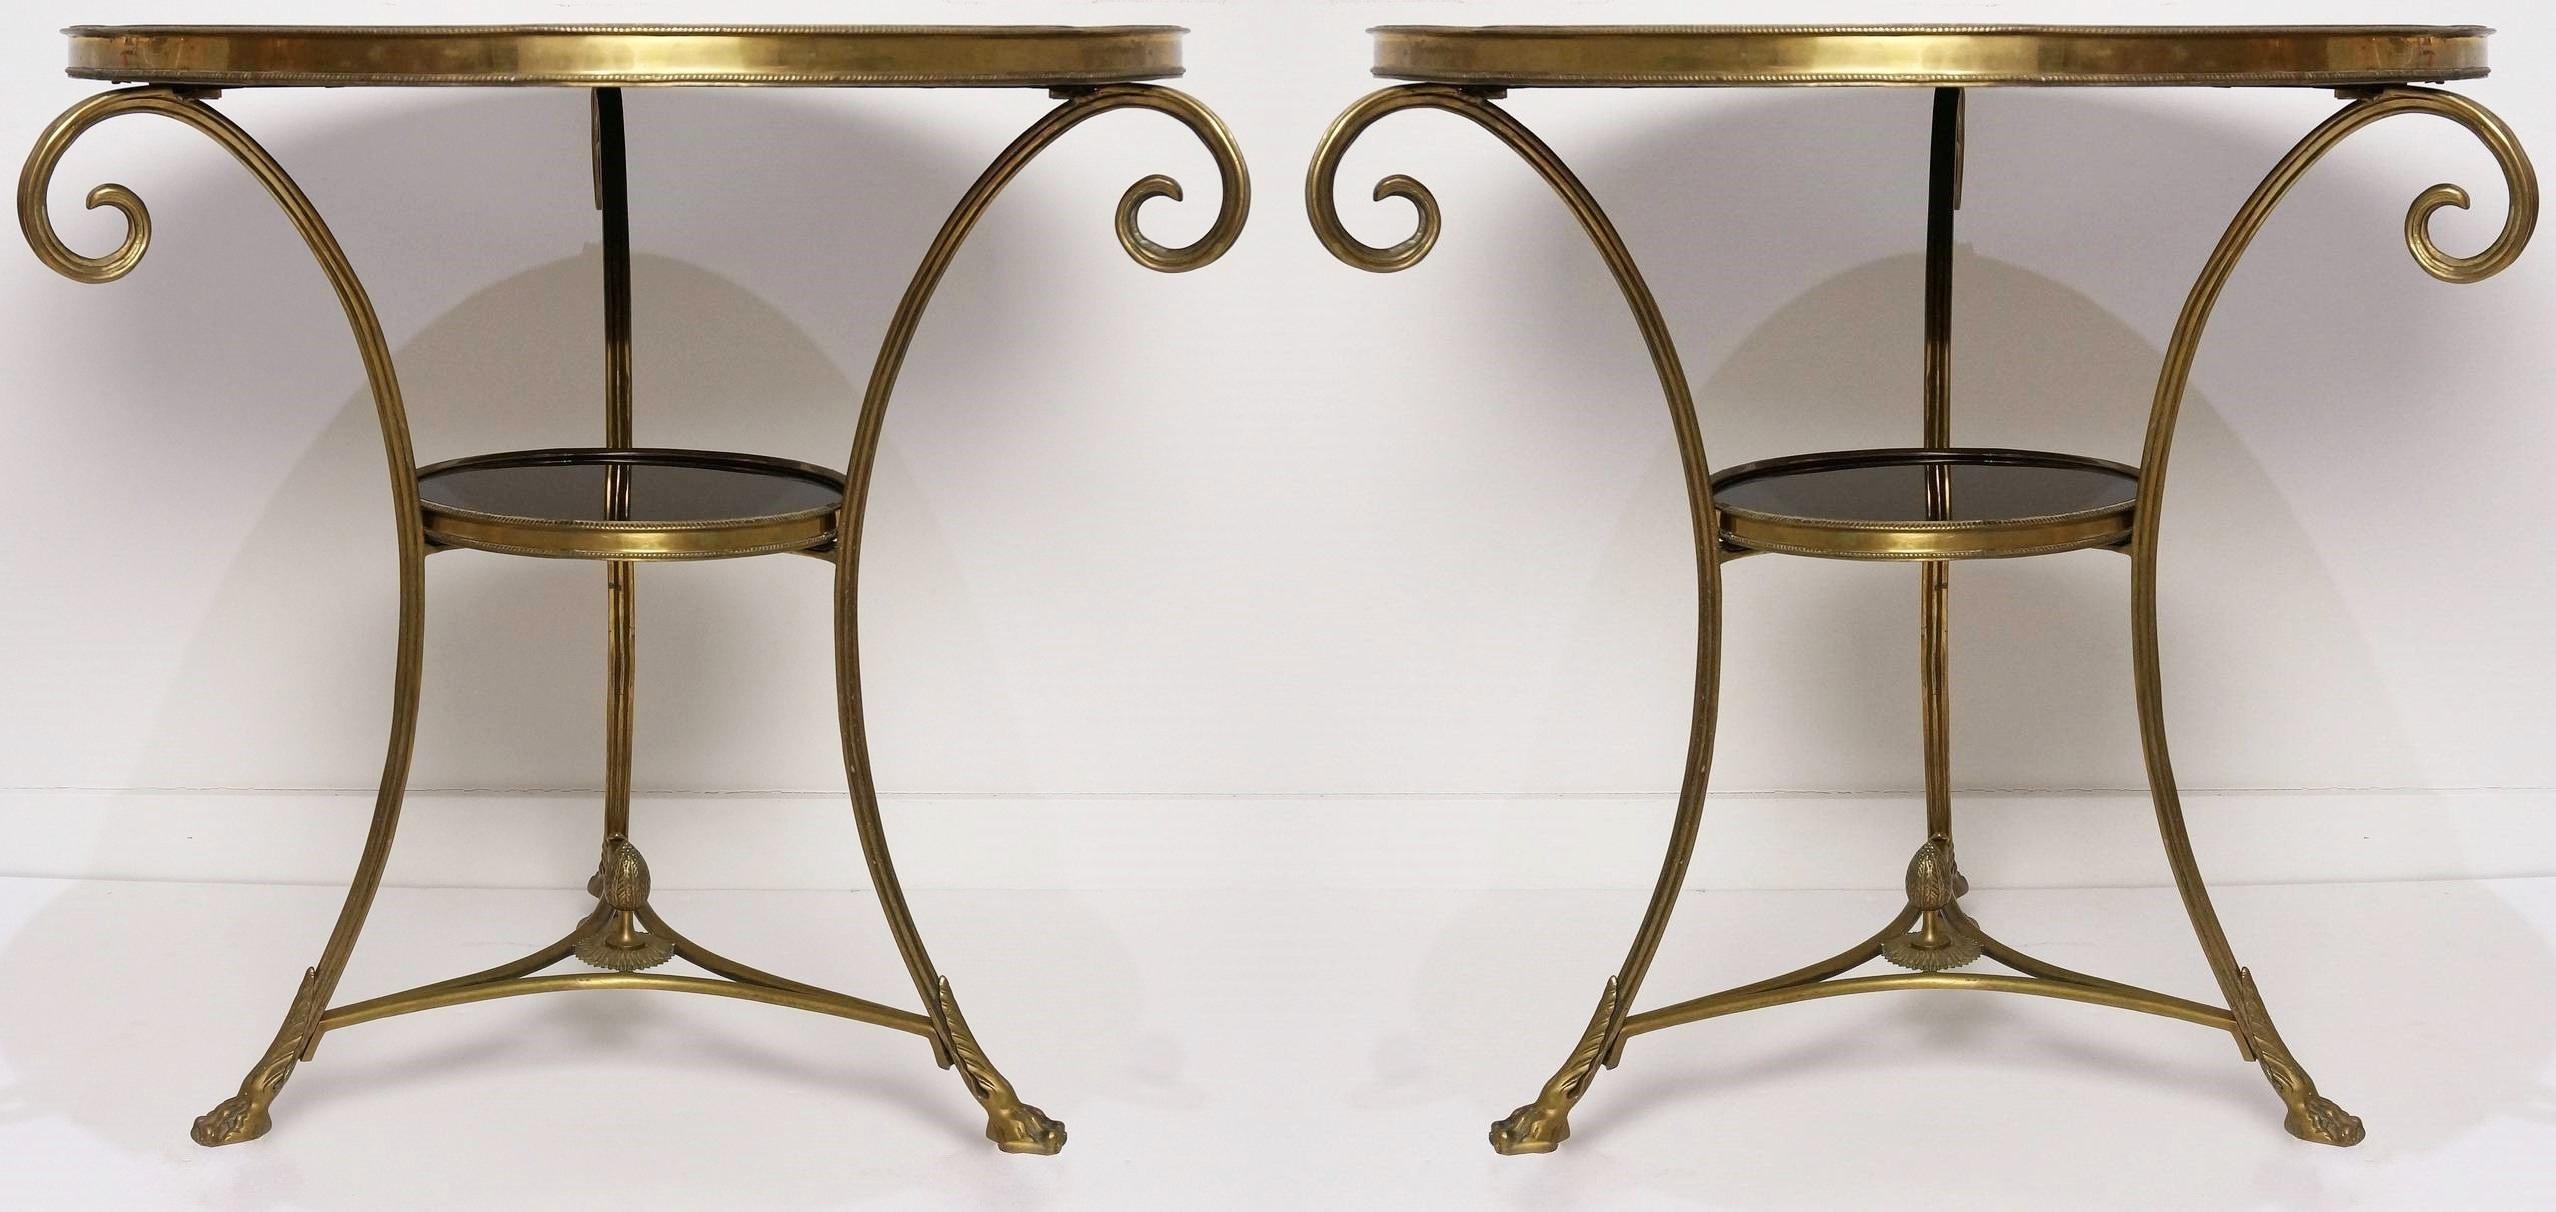 French Pair of Louis XVI Style Two-Tier Bronze Dore' and Marble Guéridons For Sale